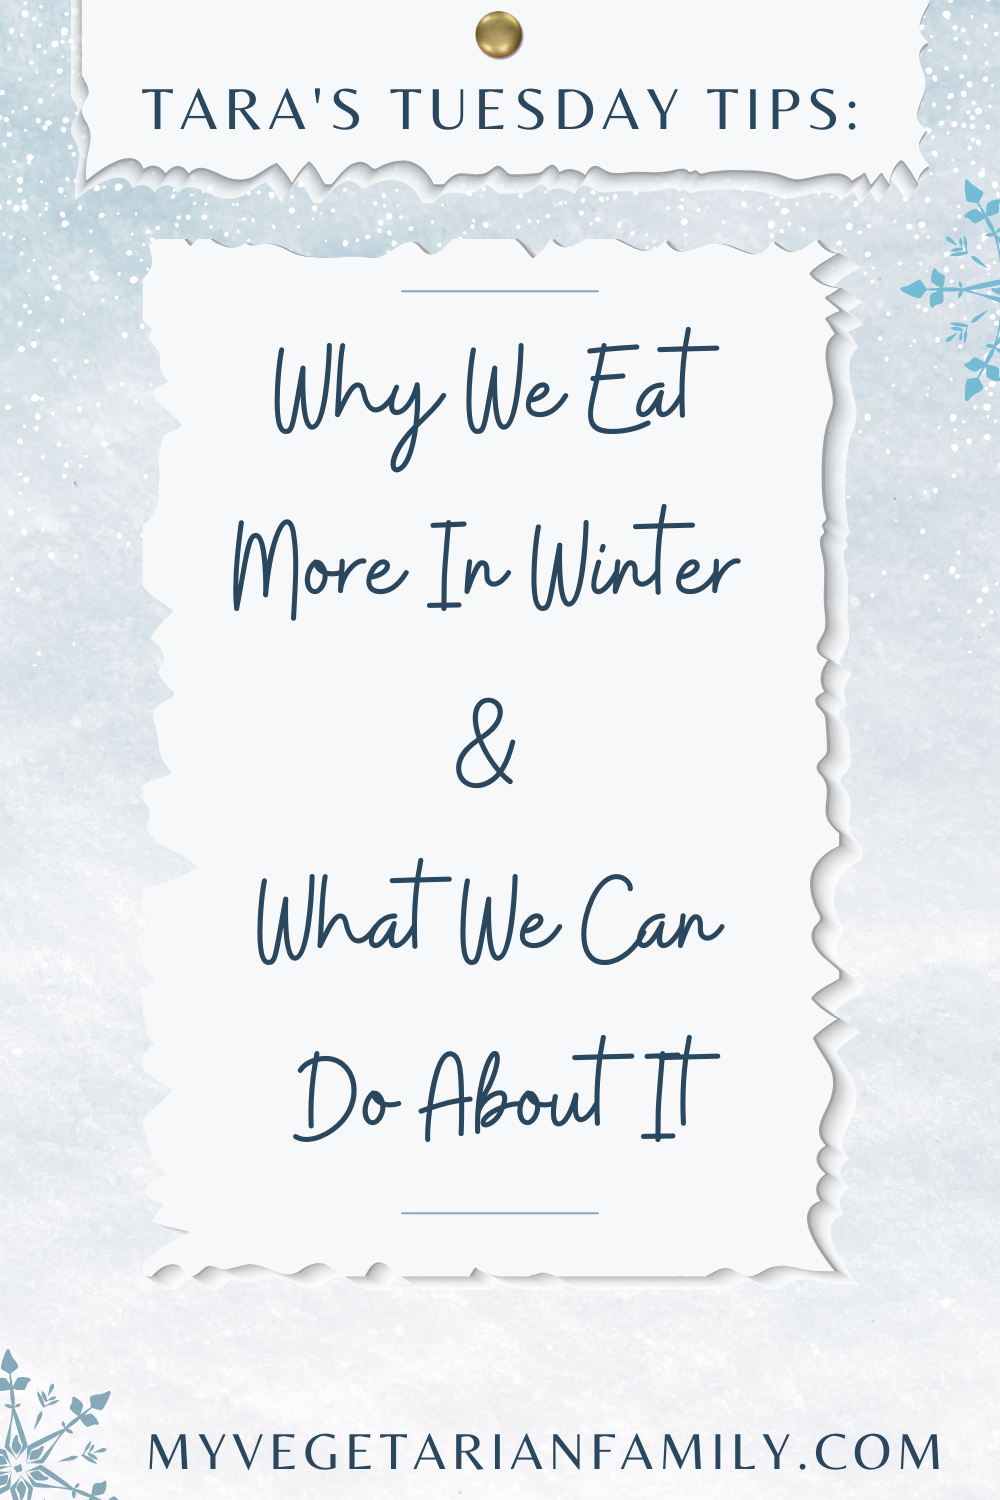 Why We Eat More in Winter | My Vegetarian Family | Tara's Tuesday Tips #wintereatingtips #nutritiontips